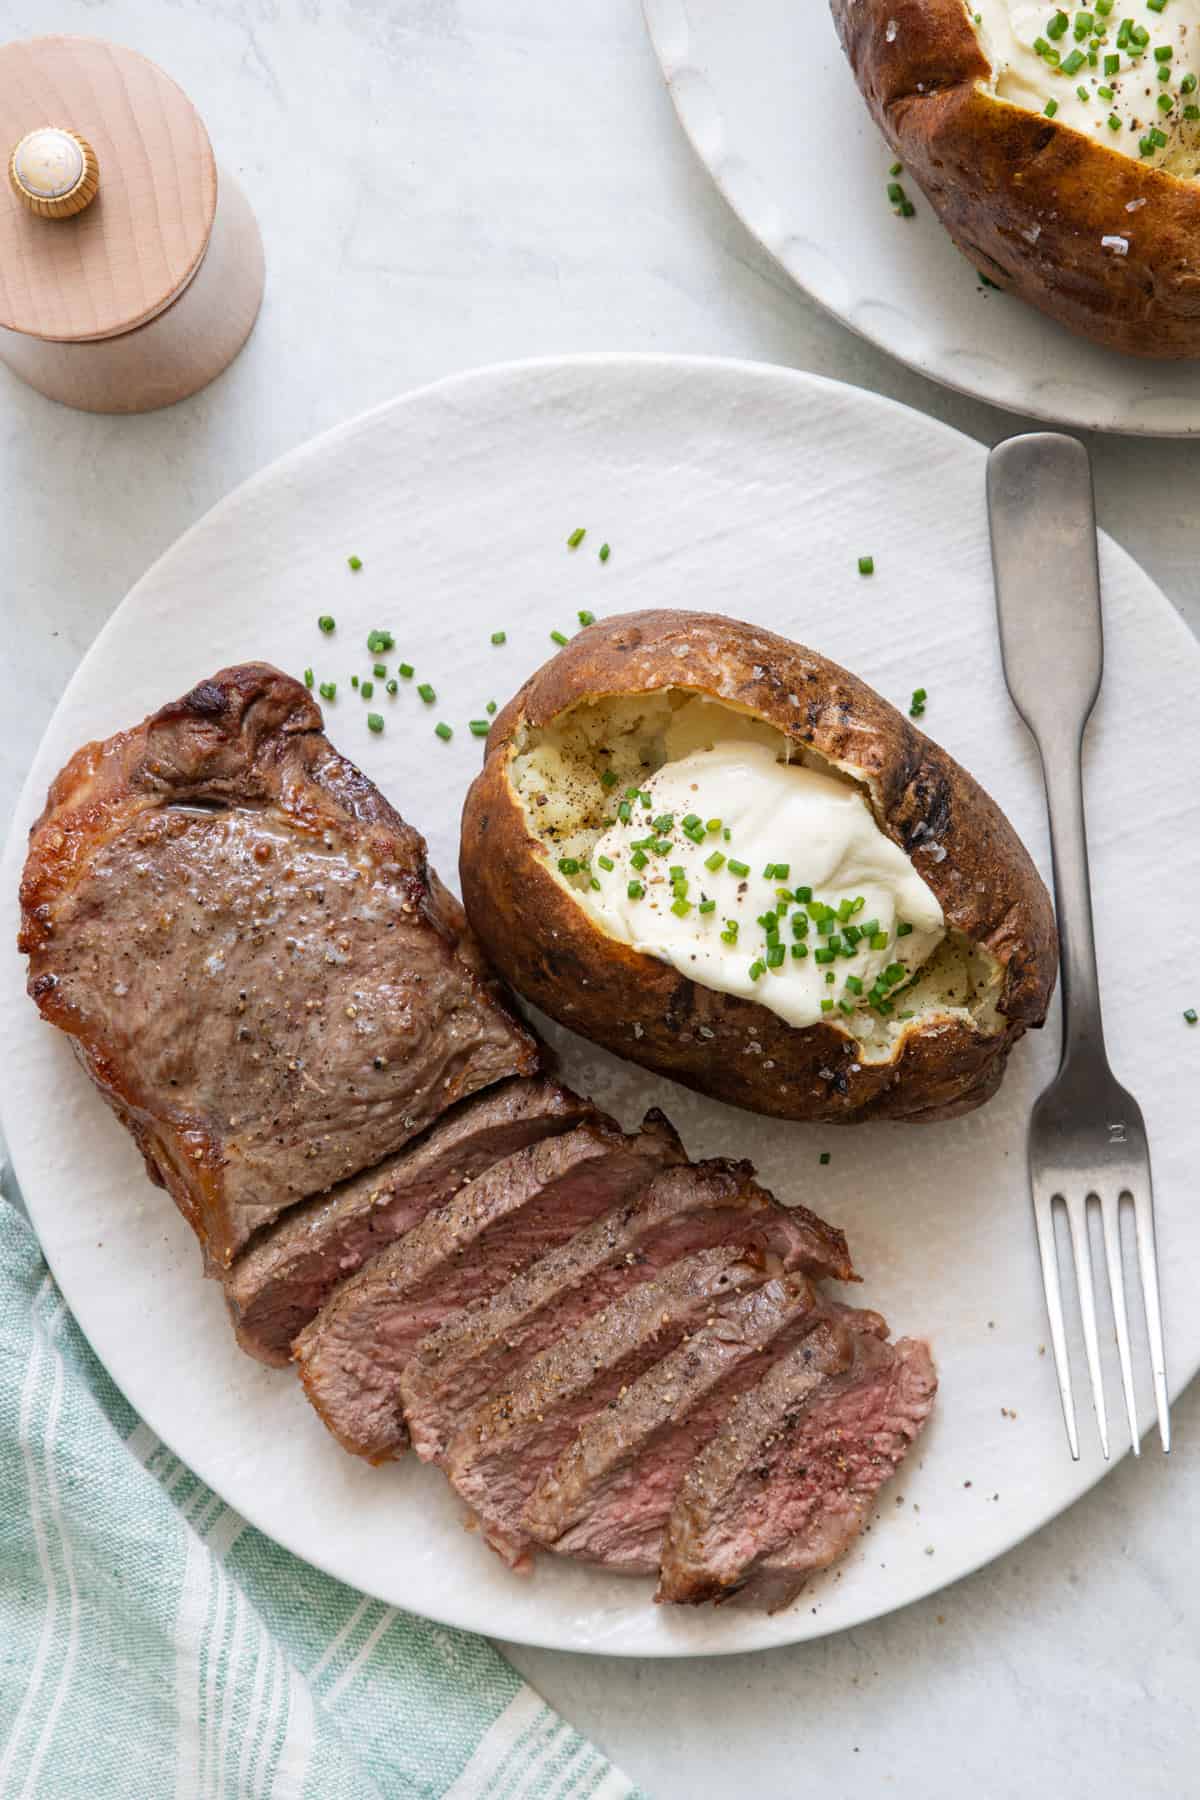 Steak cooked medium sliced half way to show color on plate next to potato with sour cream and chives.